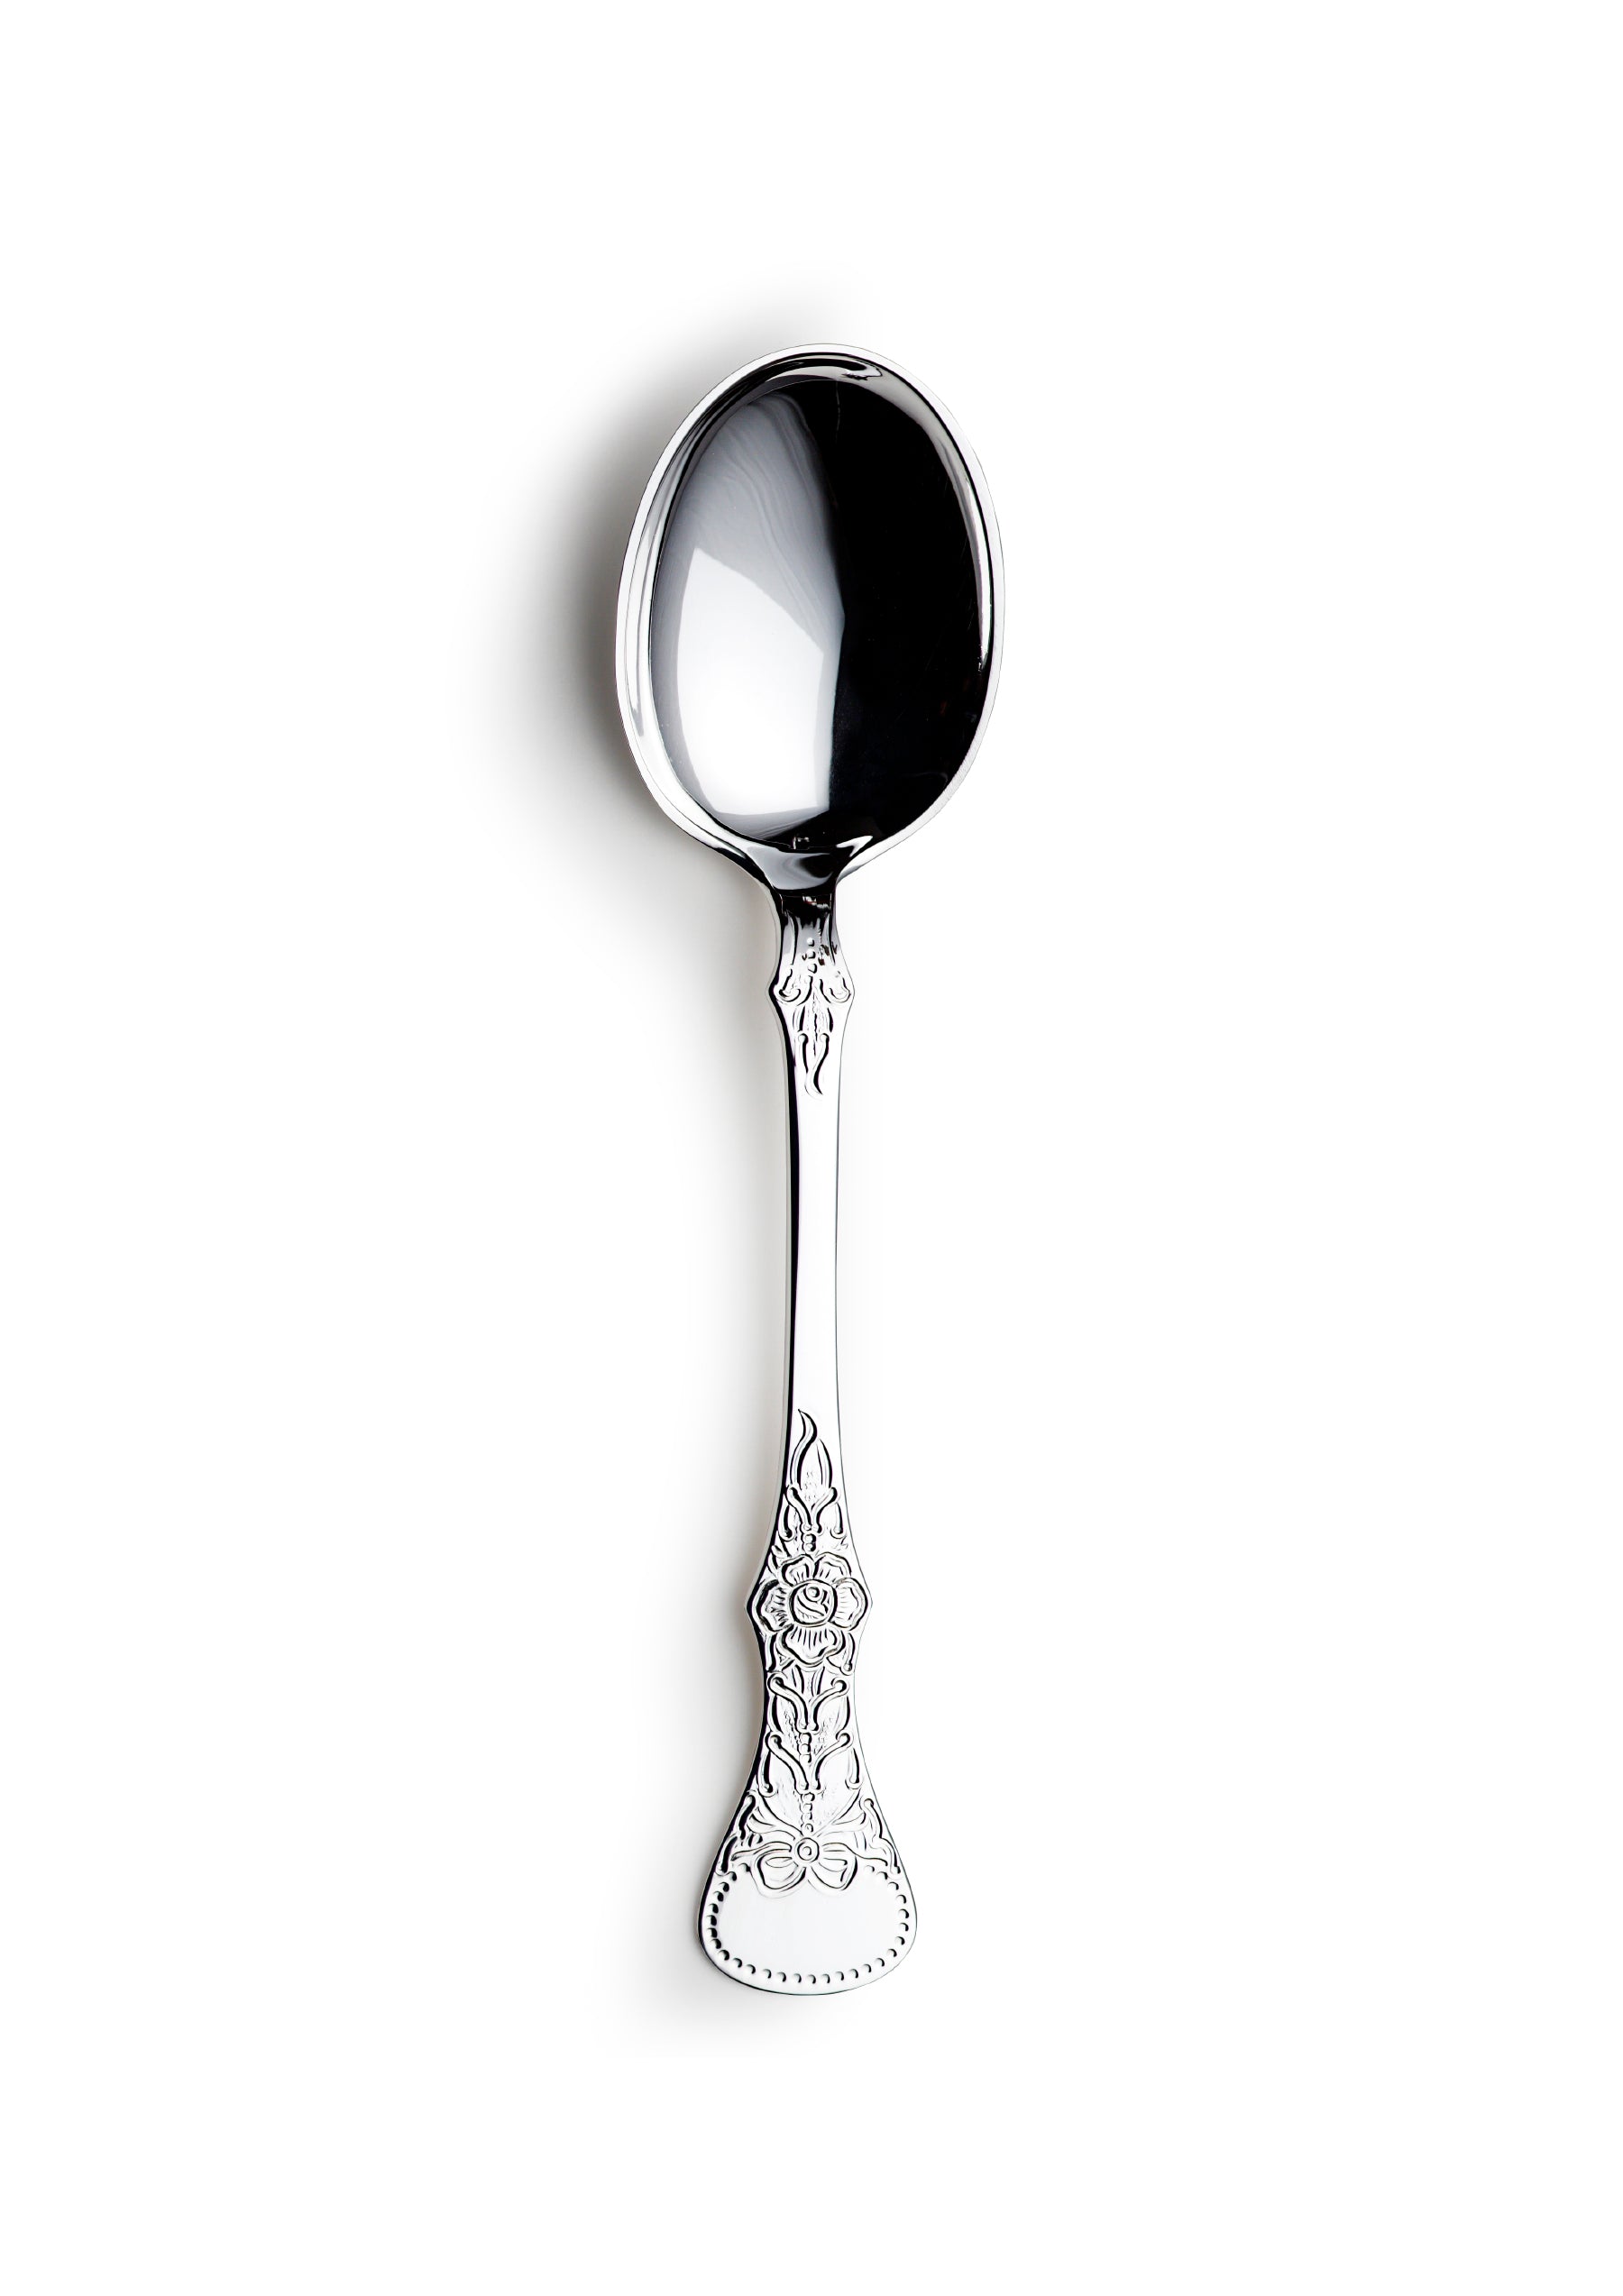 Rose small tablespoon